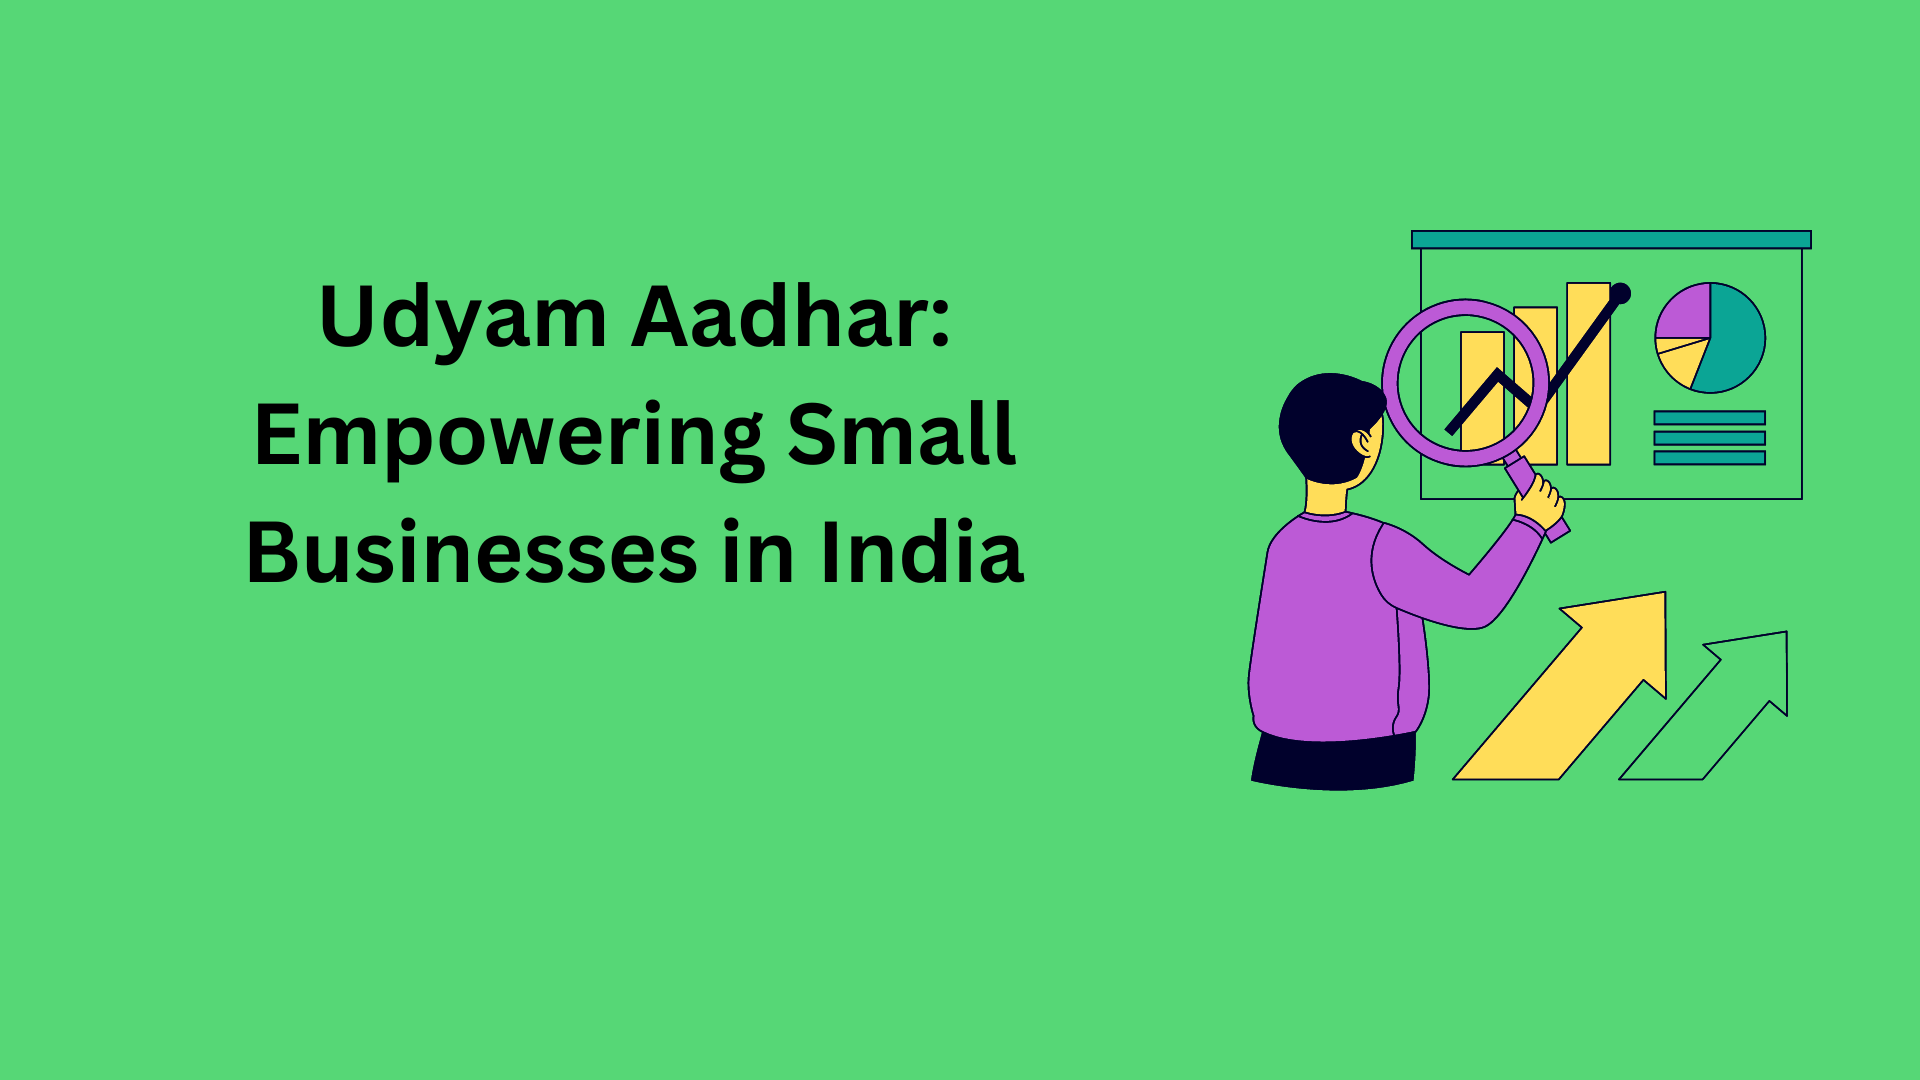 Udyam Aadhar: Empowering Small Businesses in India